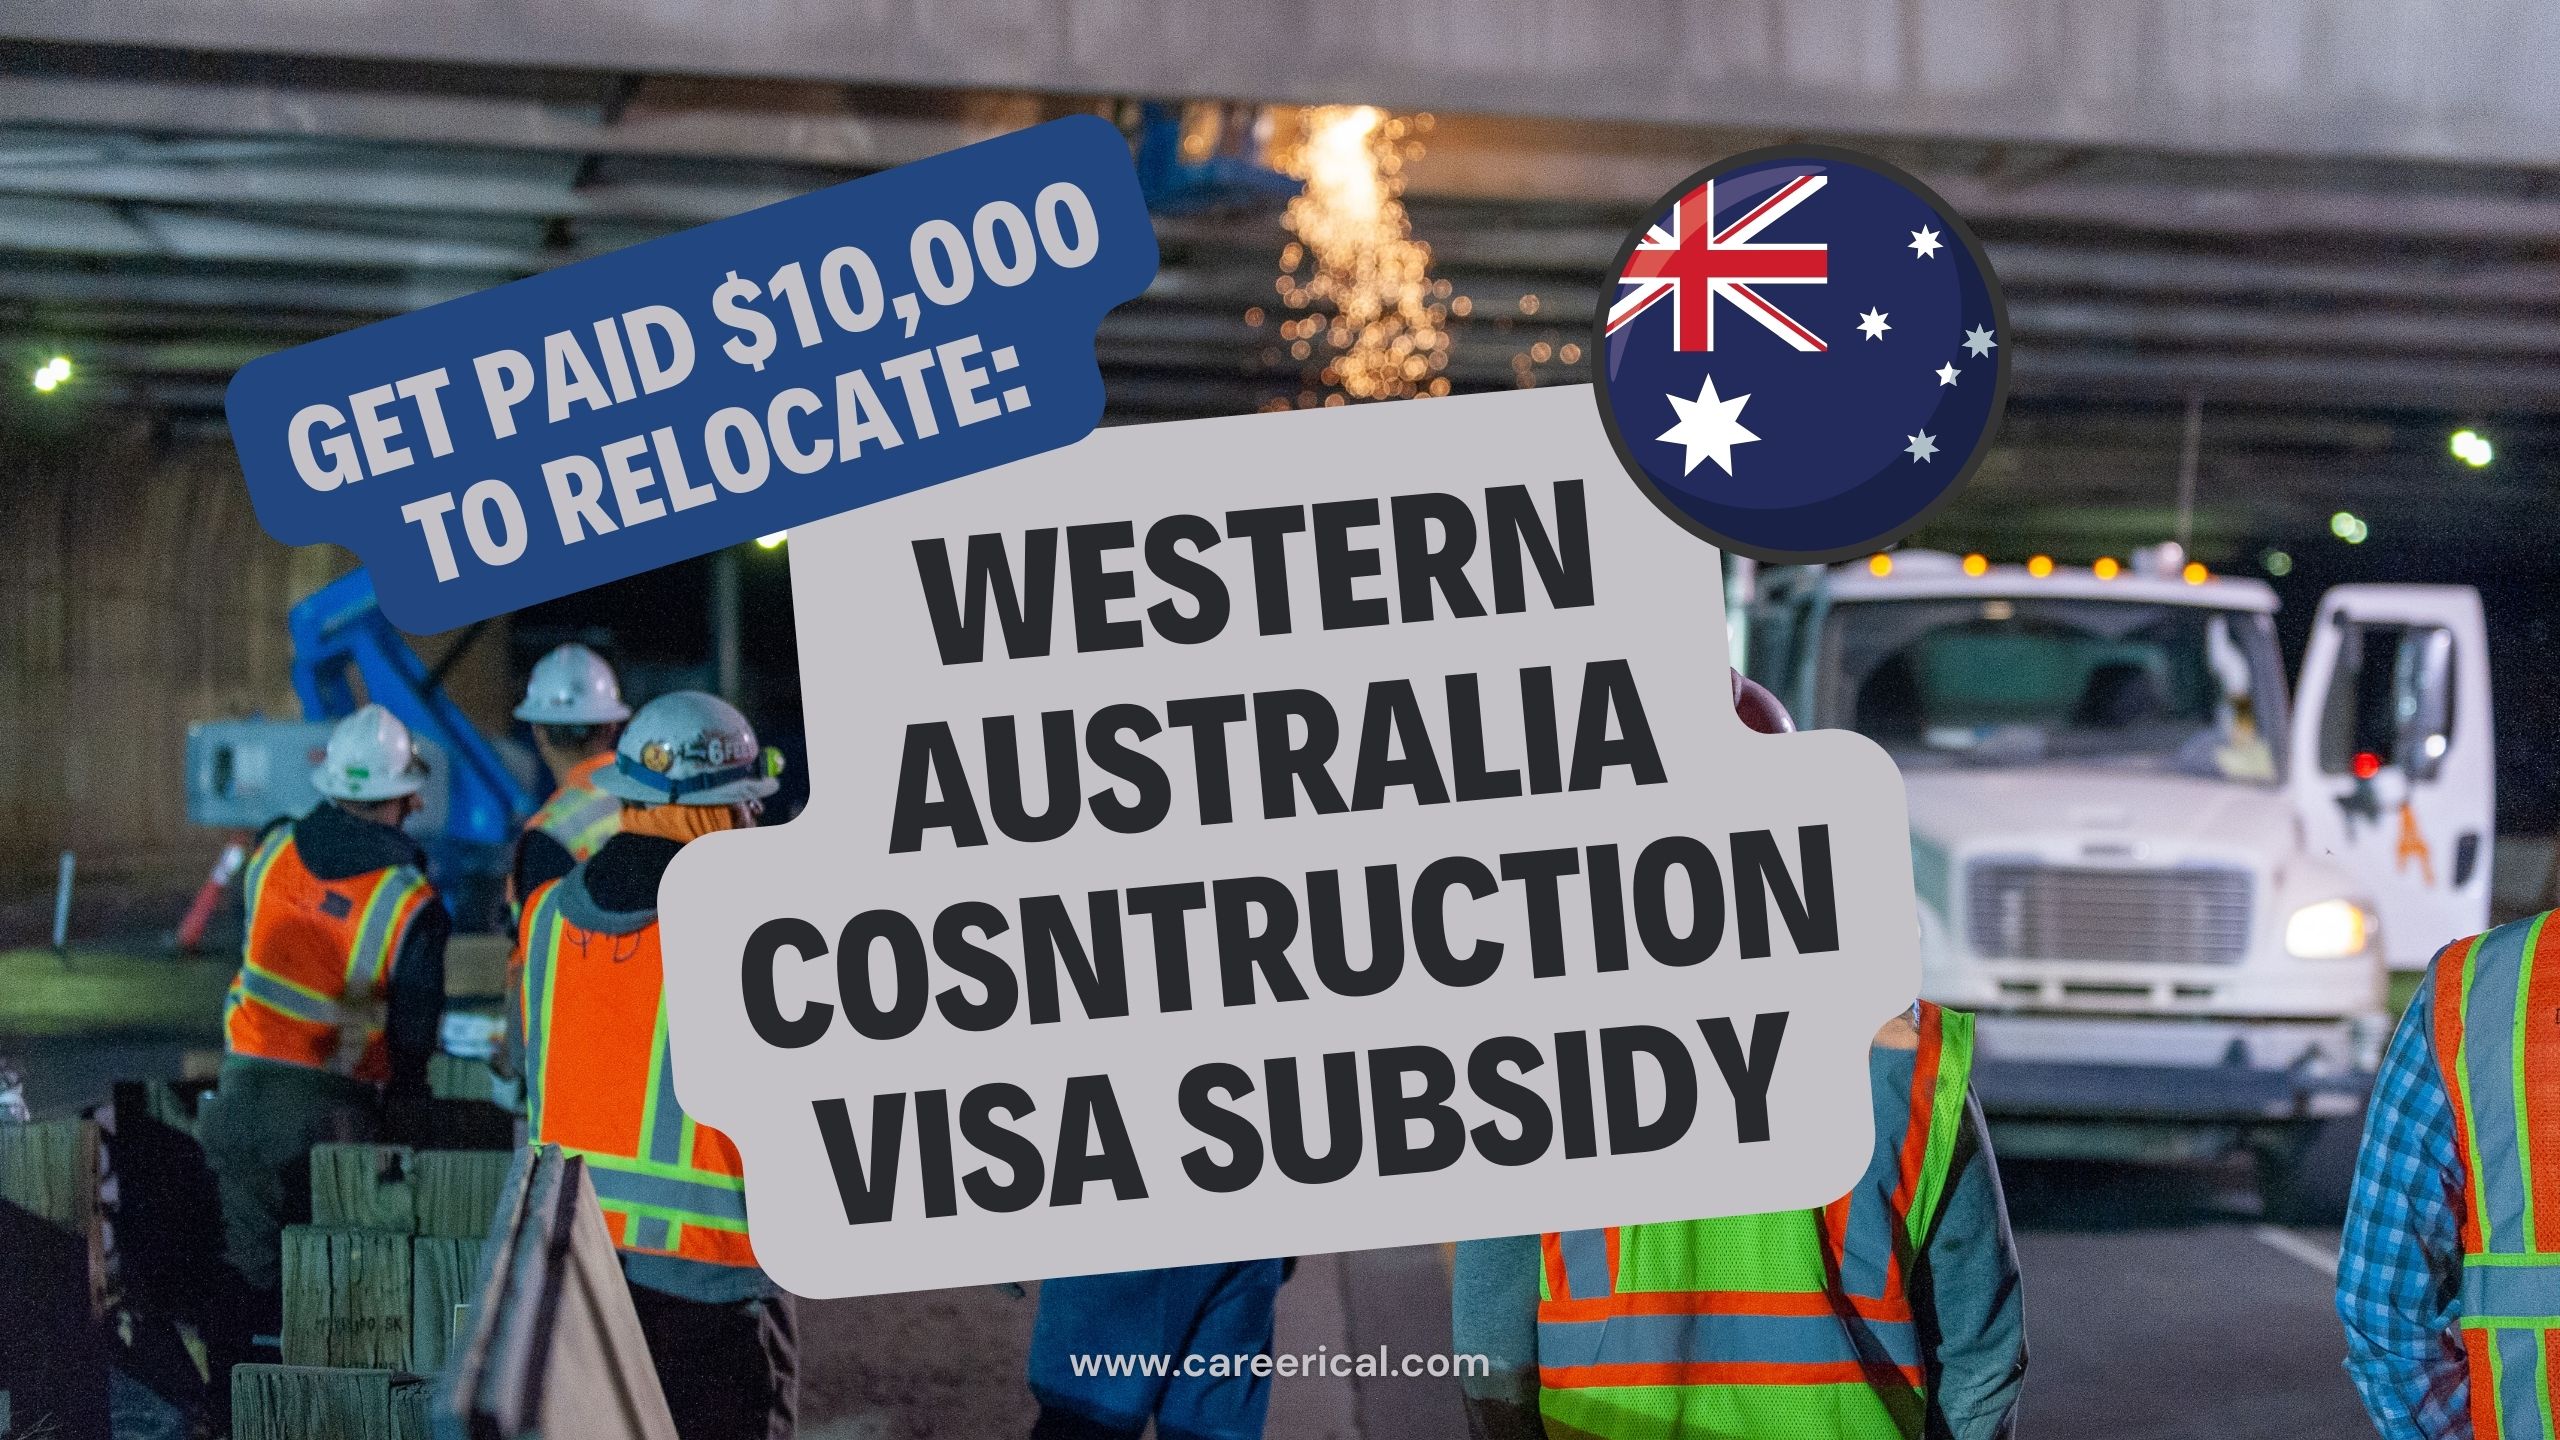 Get Paid $10,000 to Relocate Western Australia Cosntruction Visa Subsidy